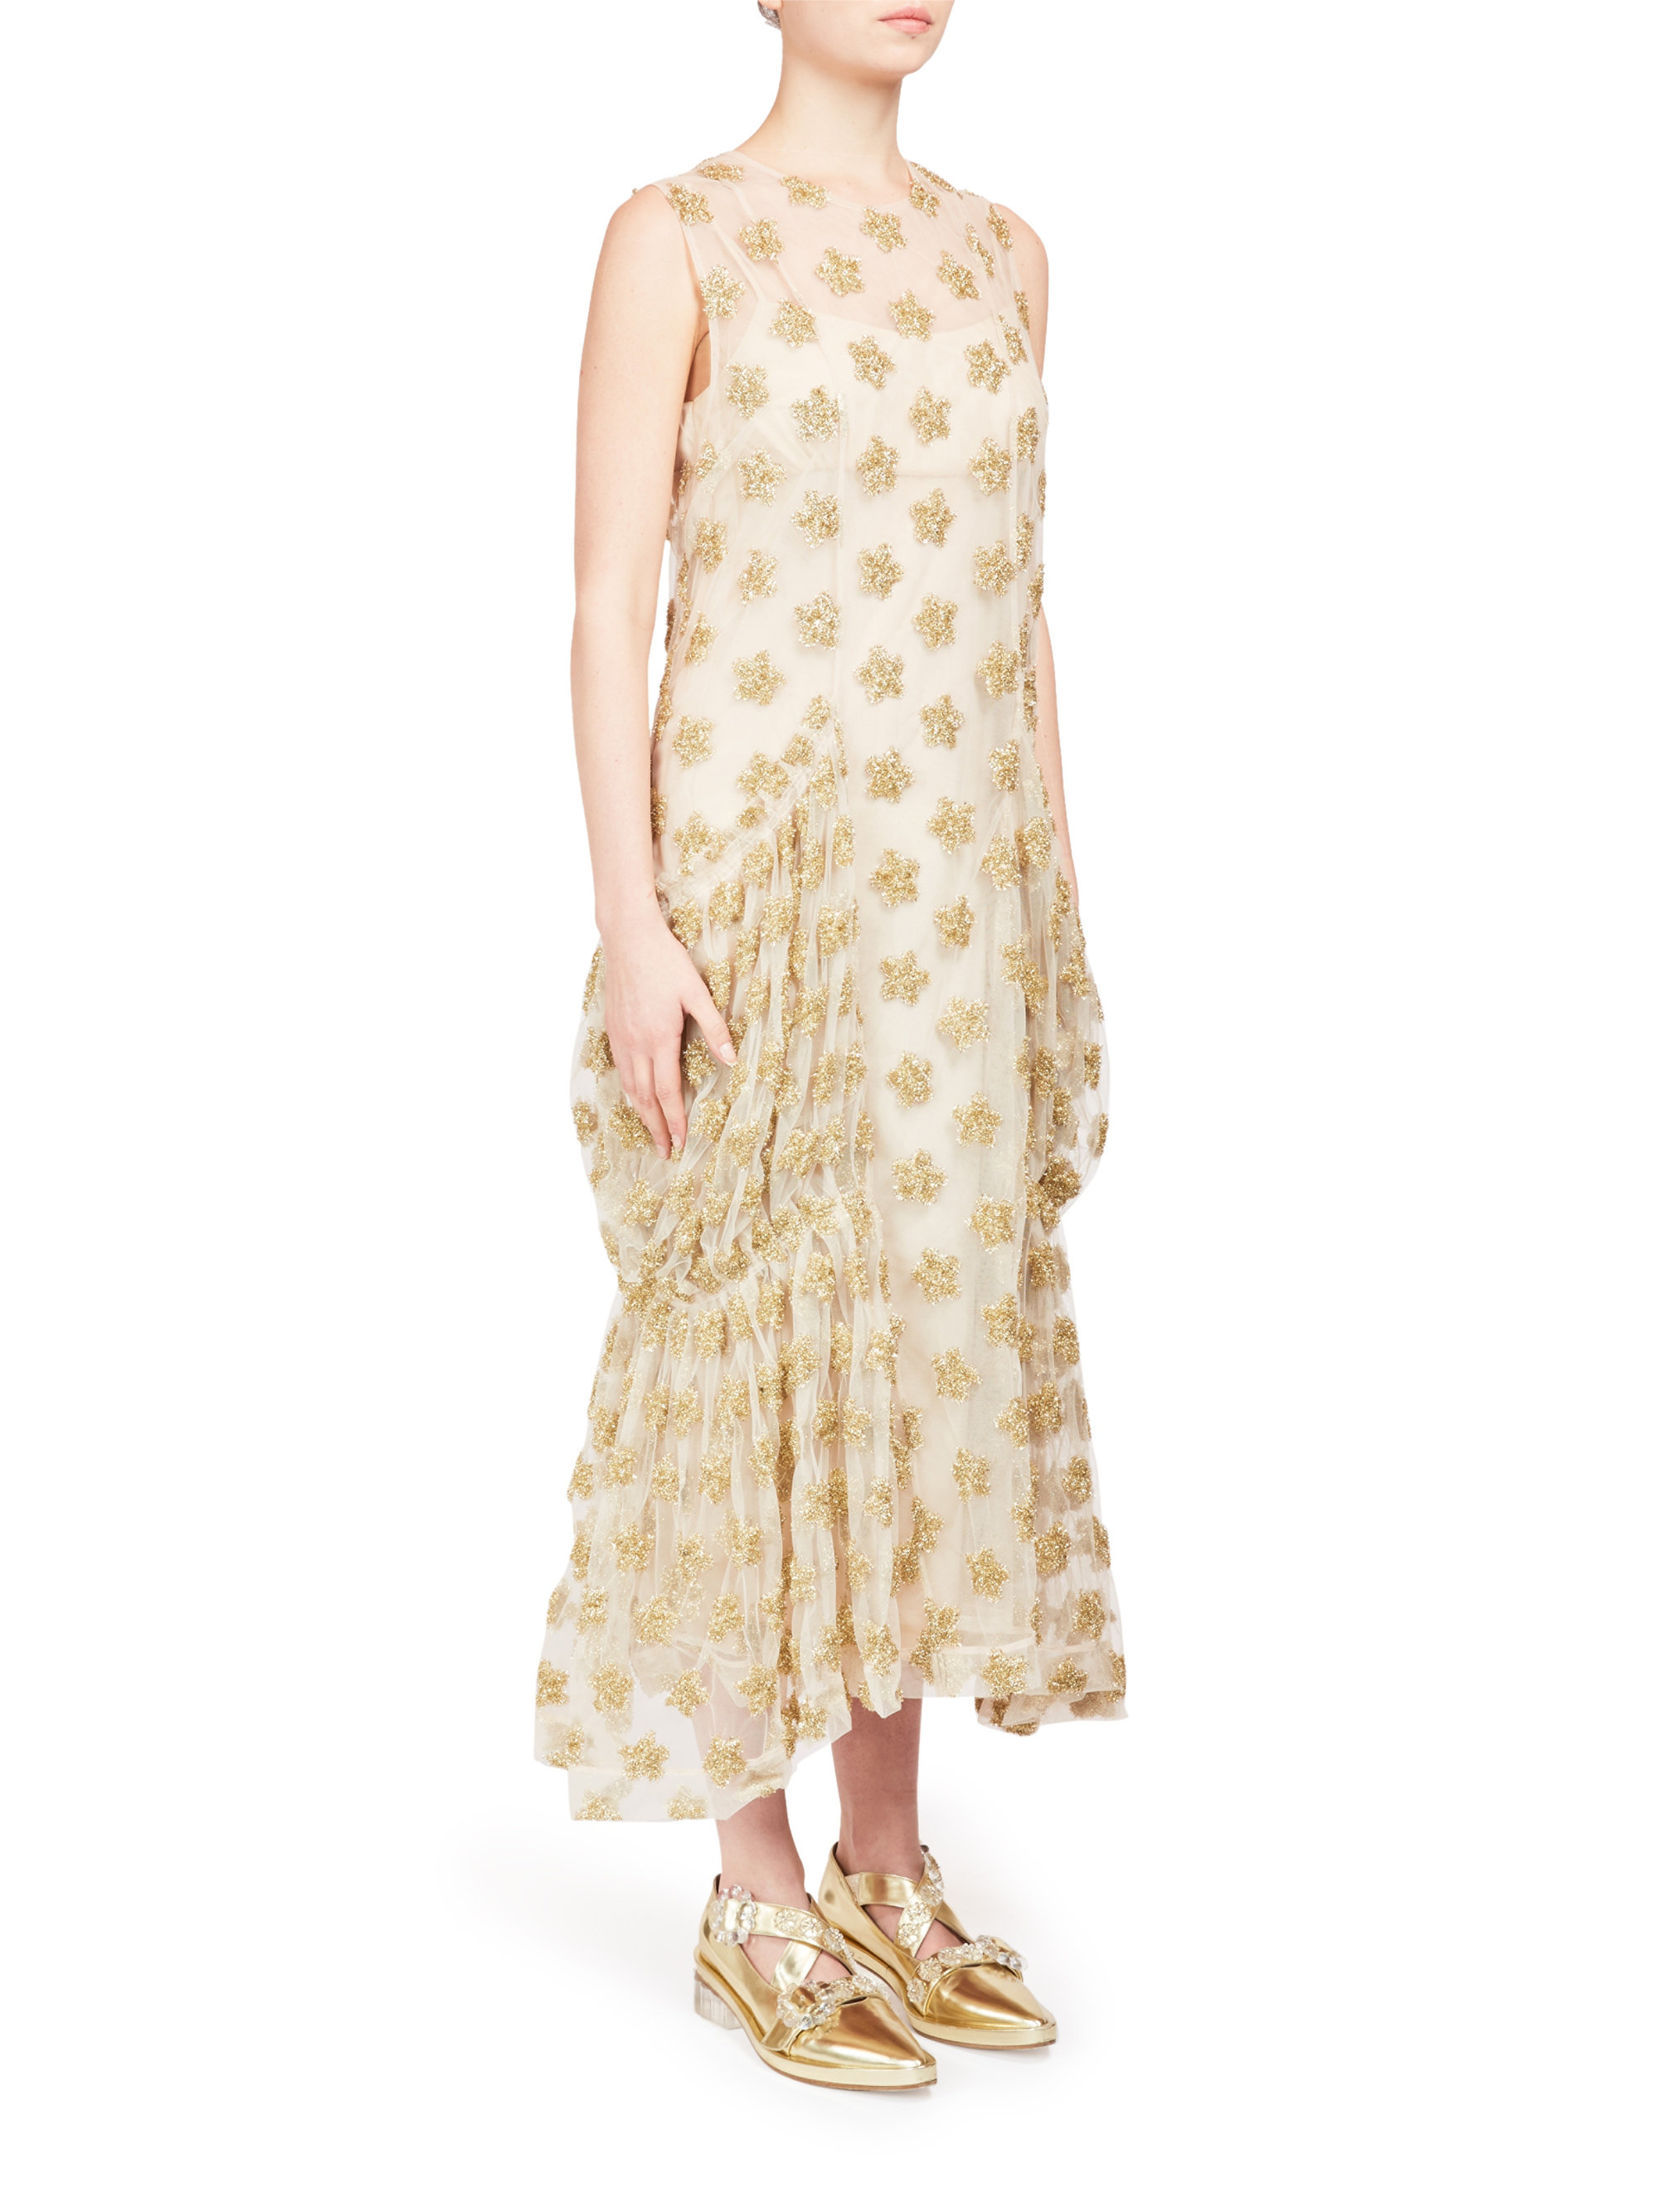 Simone Rocha Lace Floral Tinsel Maxi Dress in Gold/Nude (Metallic) - Lyst